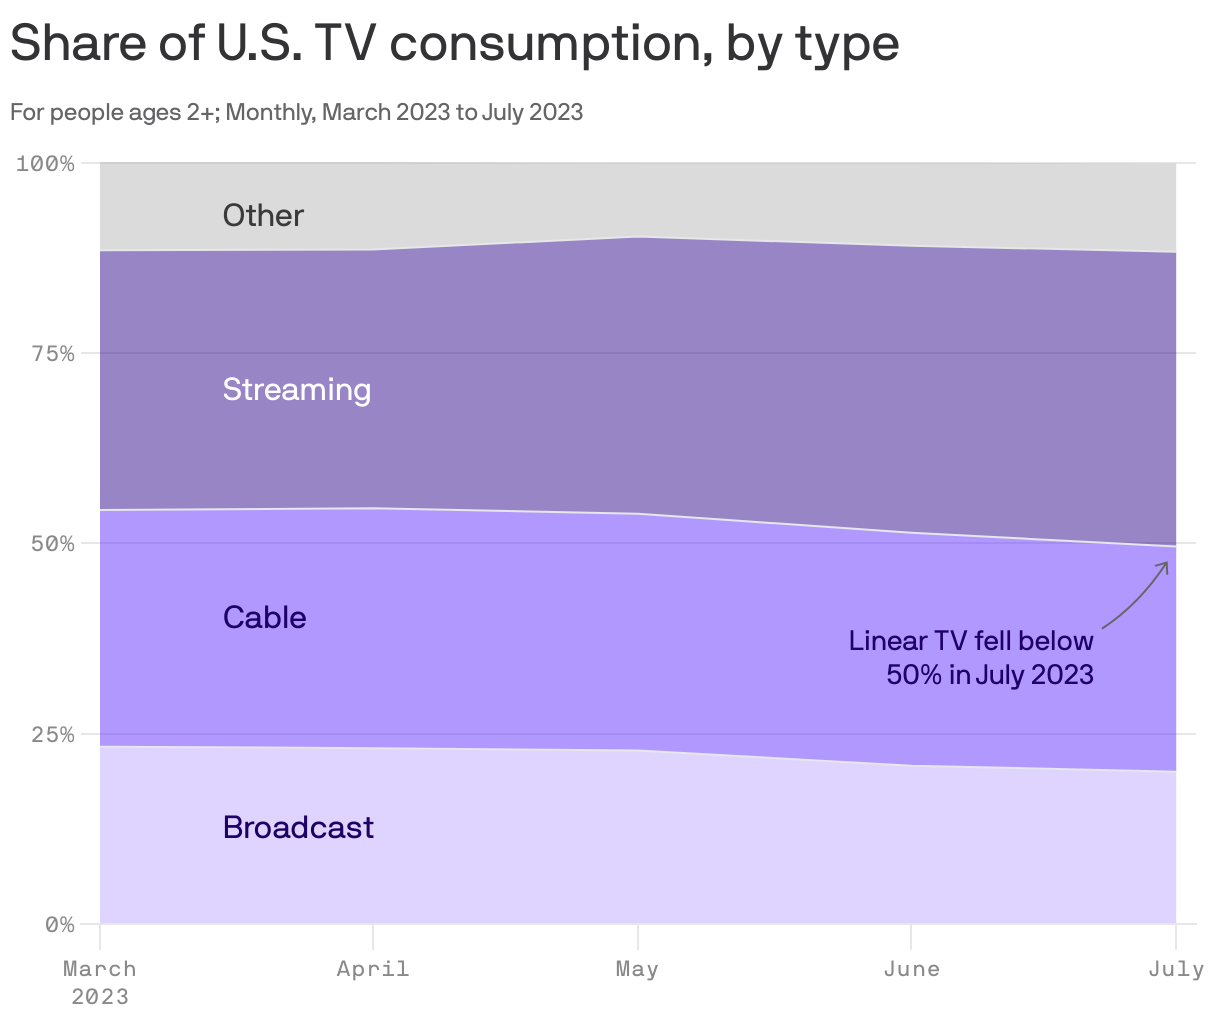 Share of U.S. TV consumption, by type